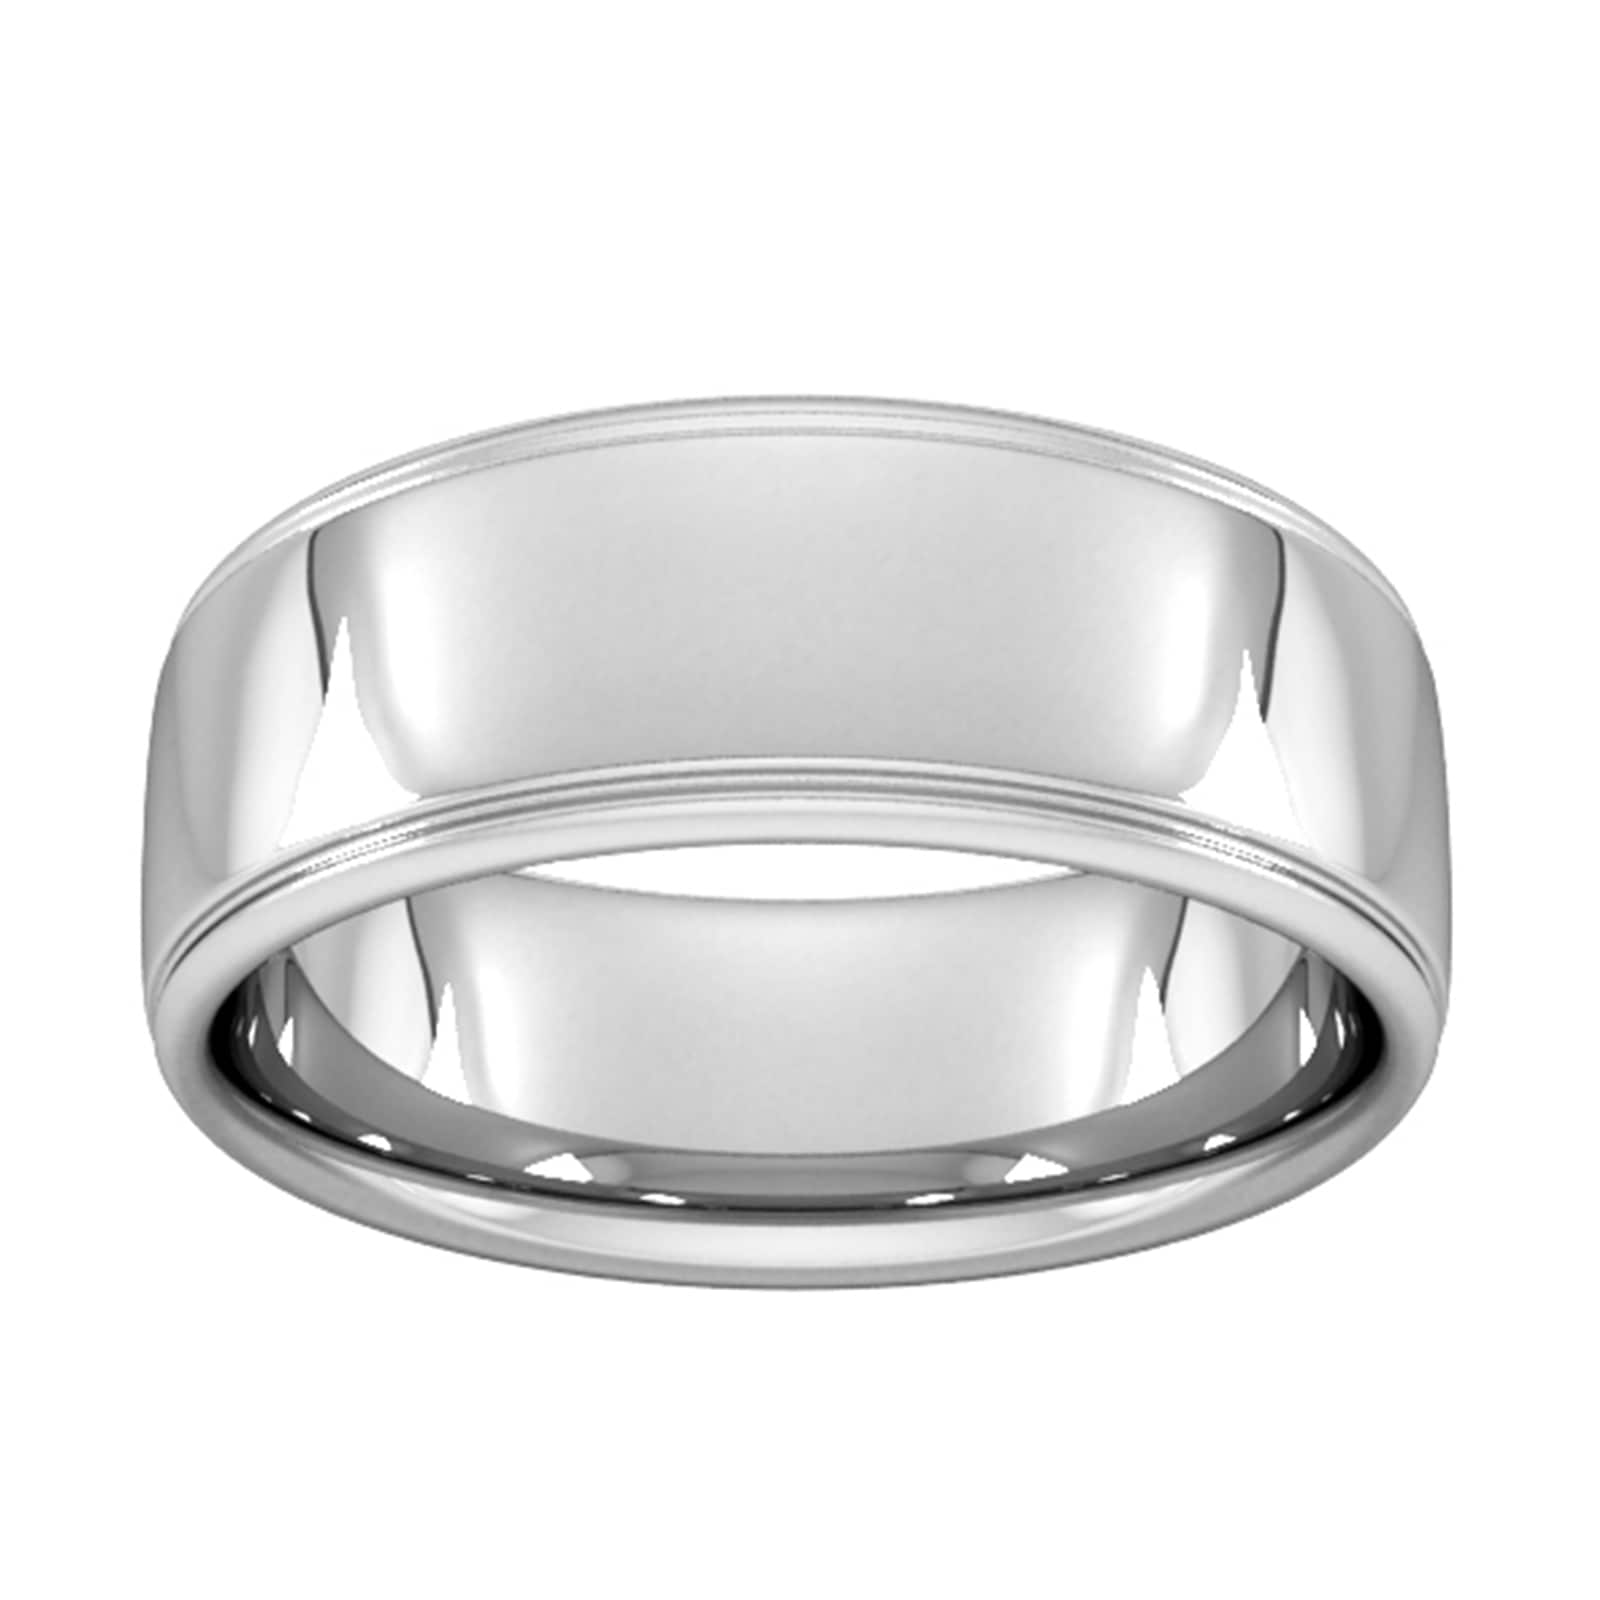 8mm Slight Court Extra Heavy Polished Finish With Grooves Wedding Ring In 9 Carat White Gold - Ring Size K